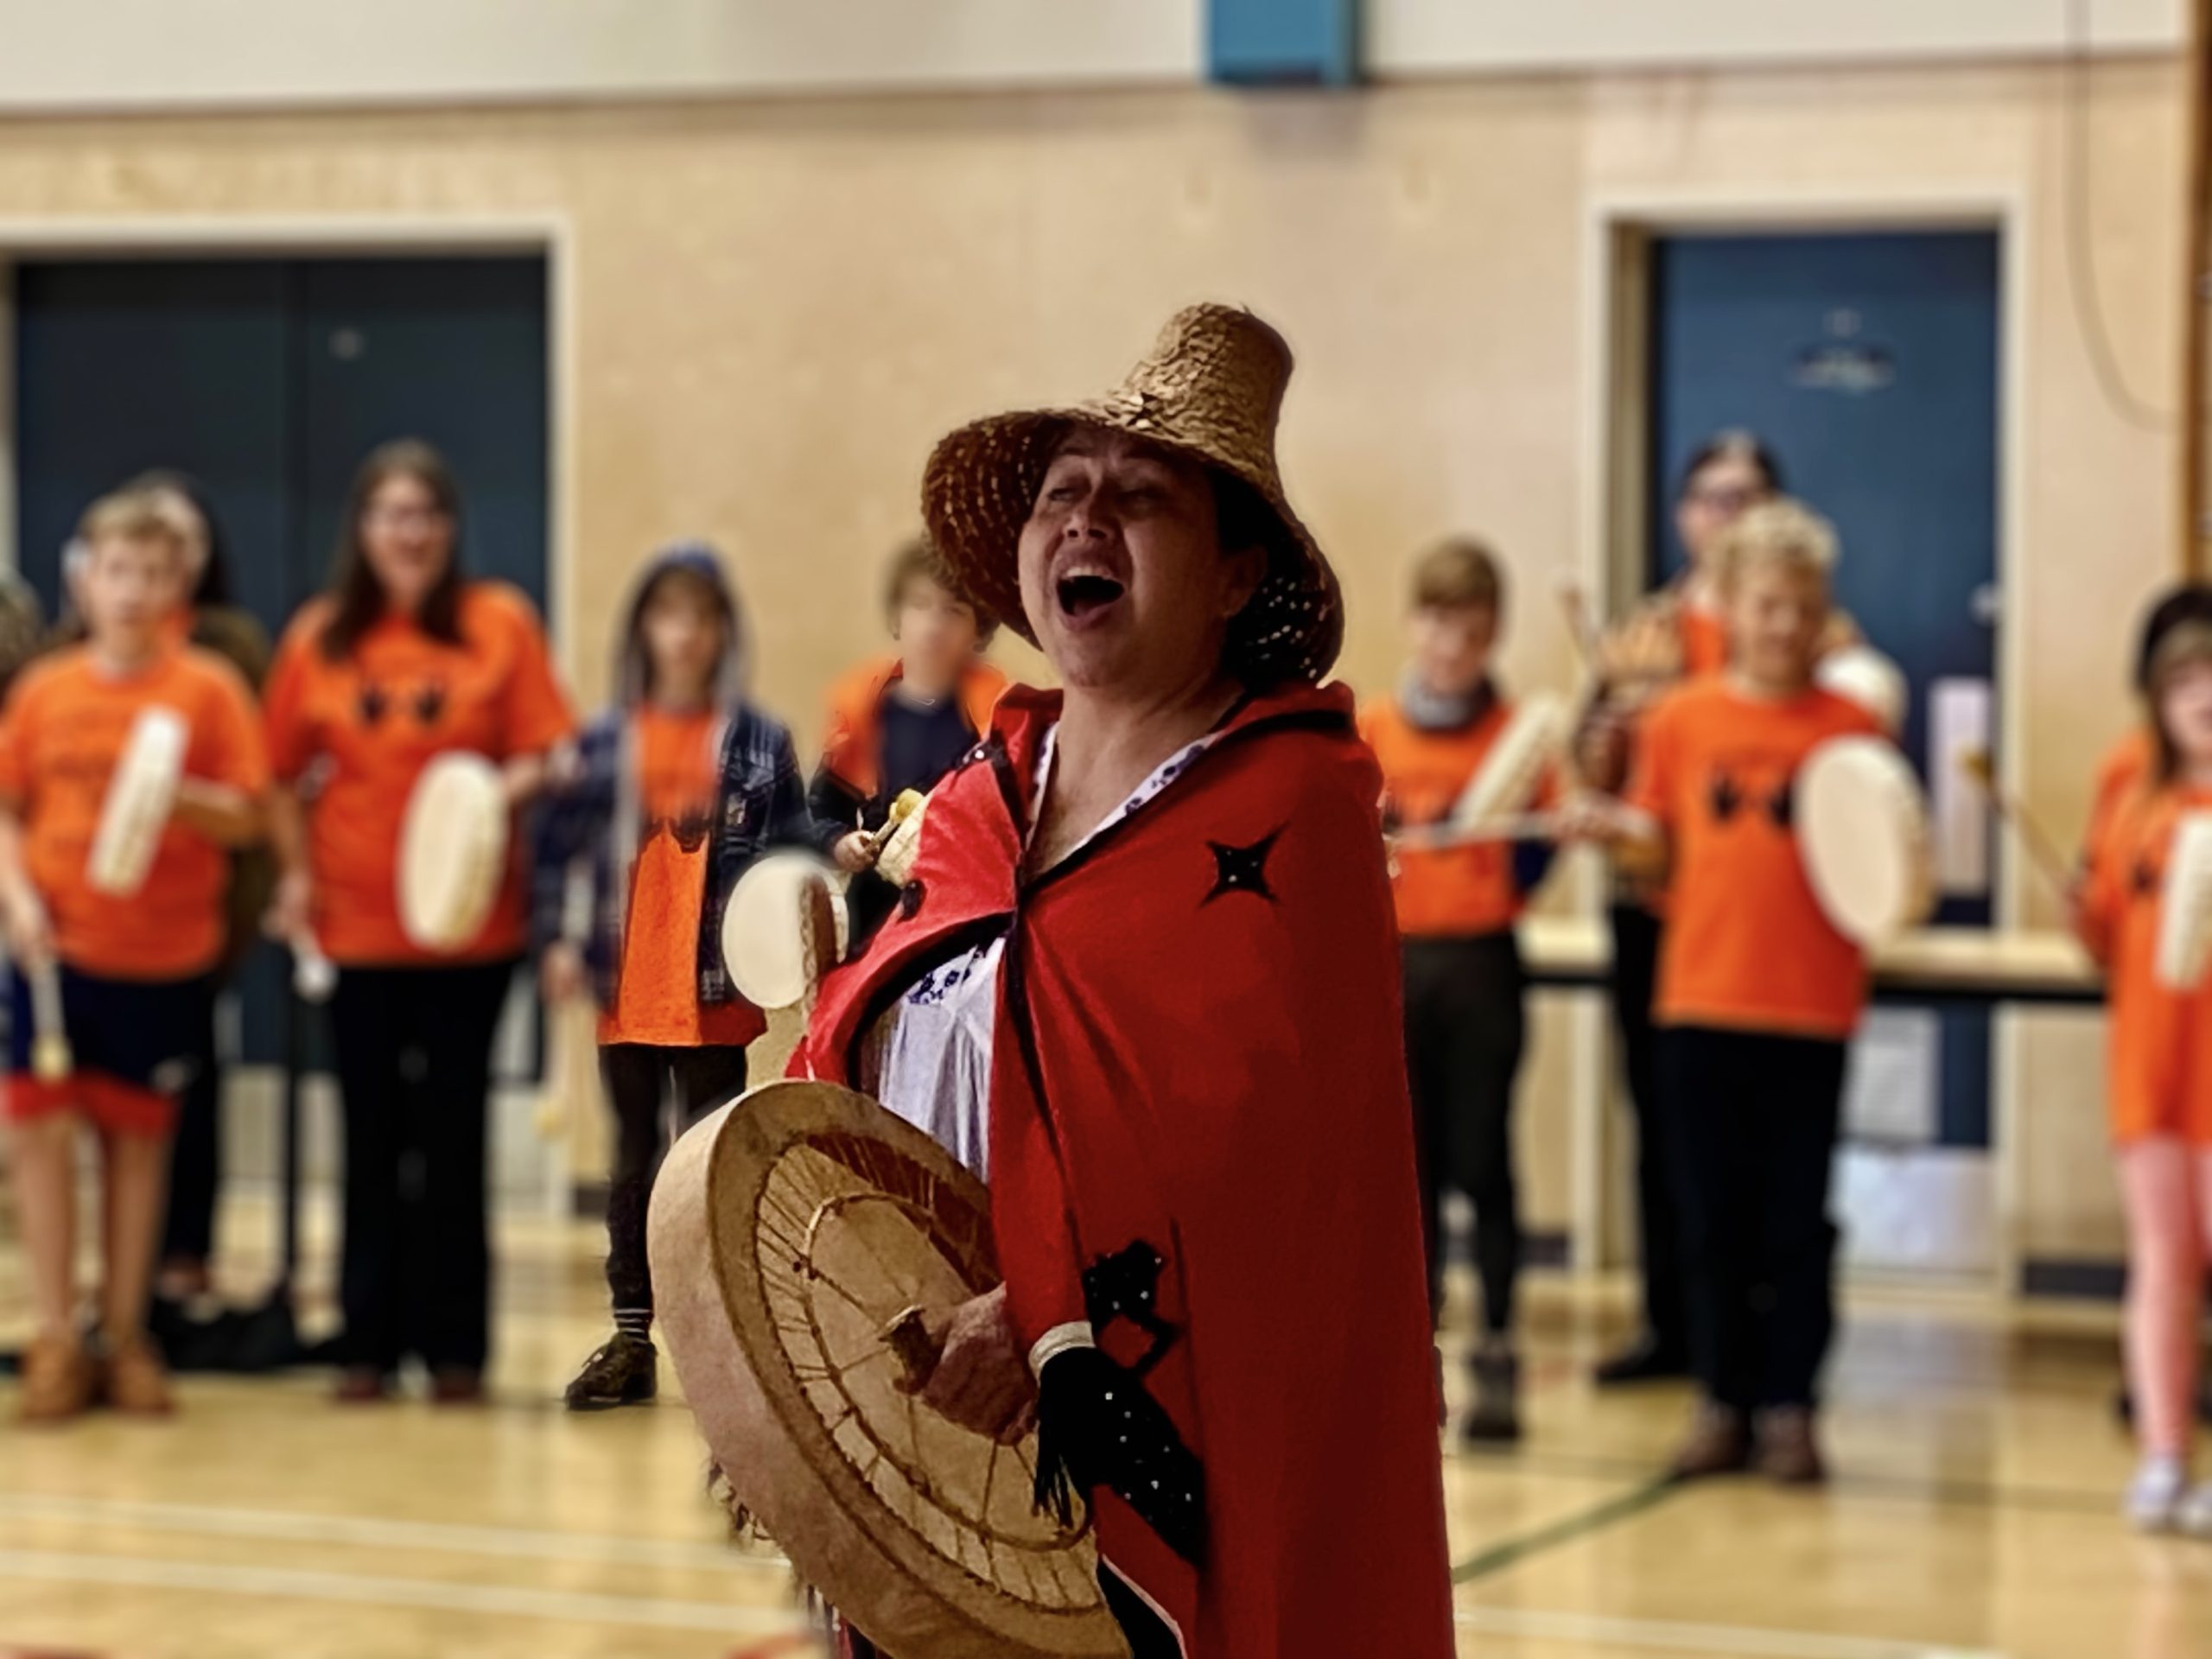 A women wrapped in orange, sings and plays a drum, leading a group of children behind her.